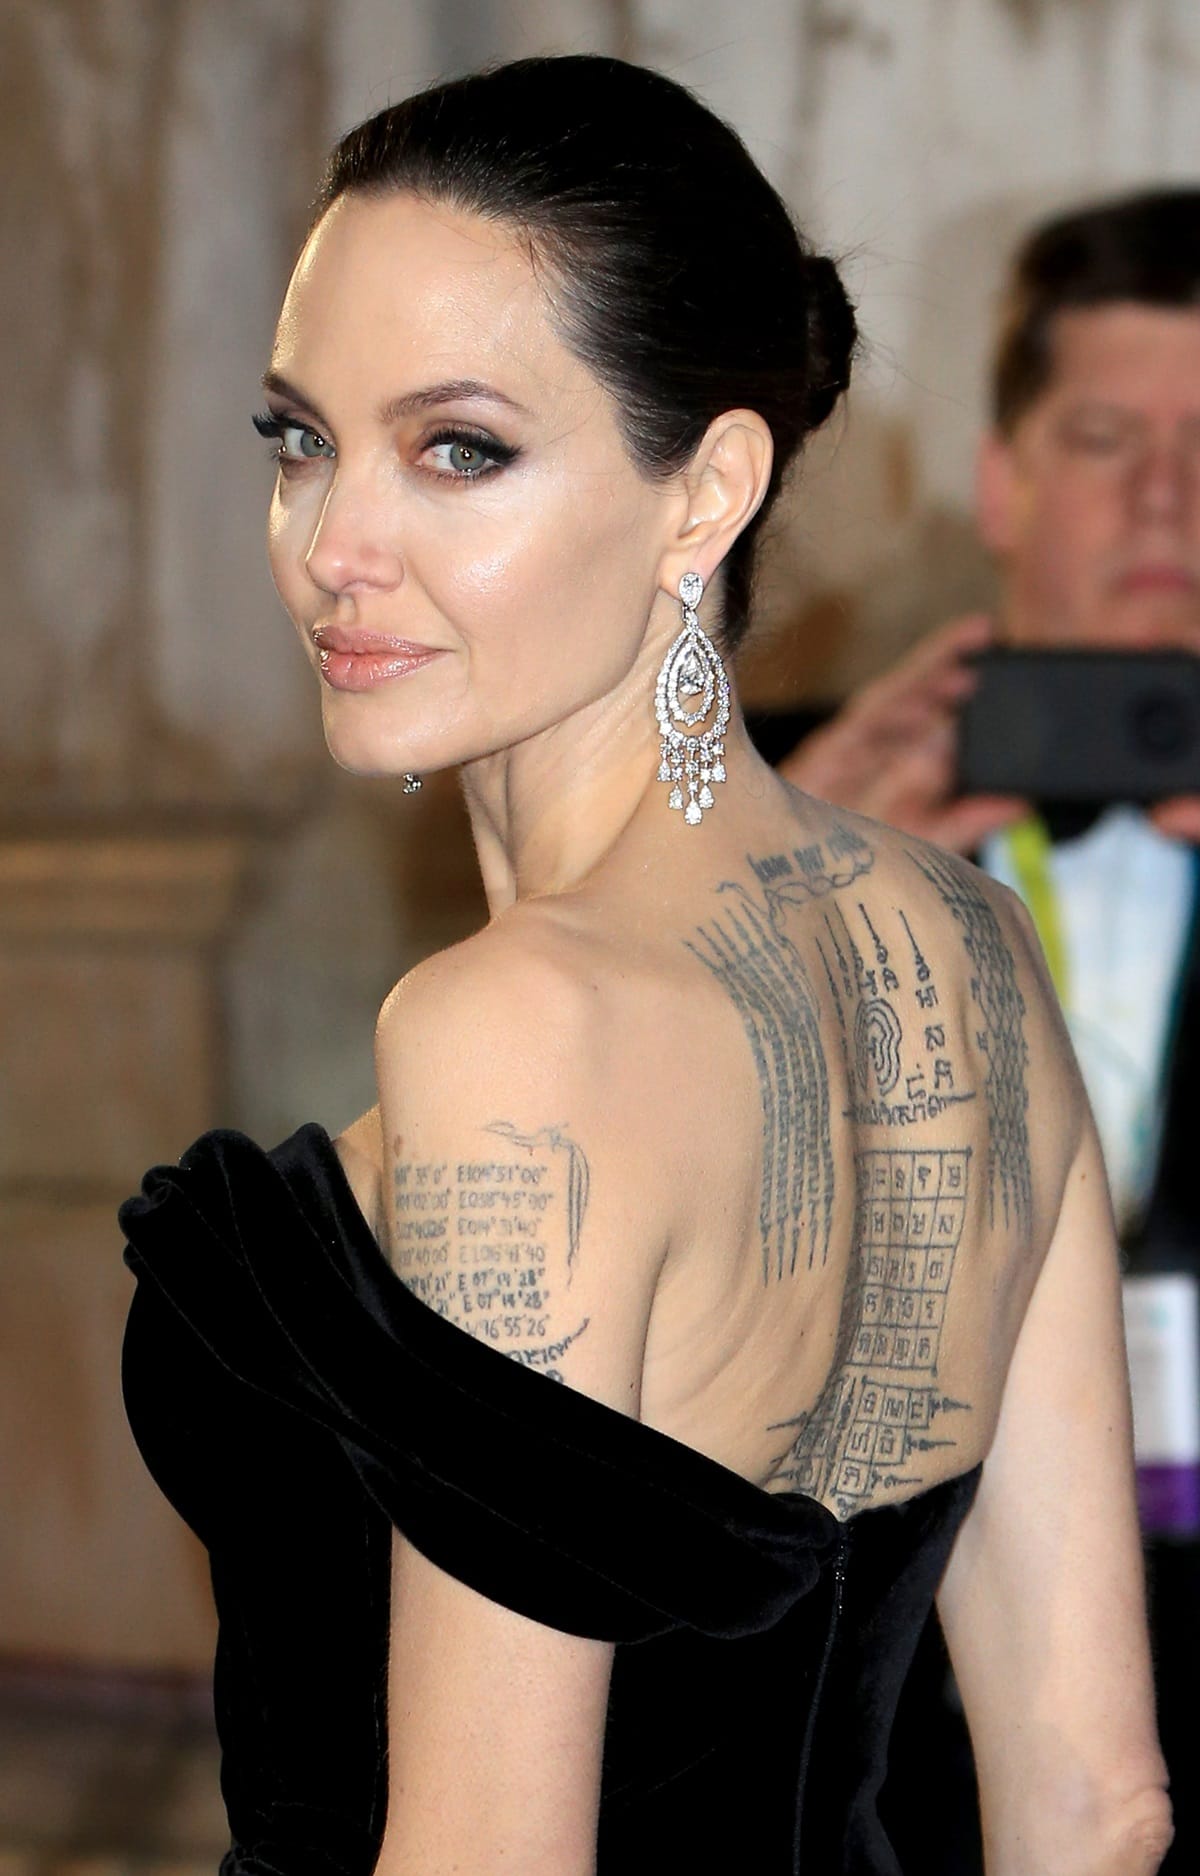 Angelina Jolie has many tattoos, but the ones on her back are the most extensive